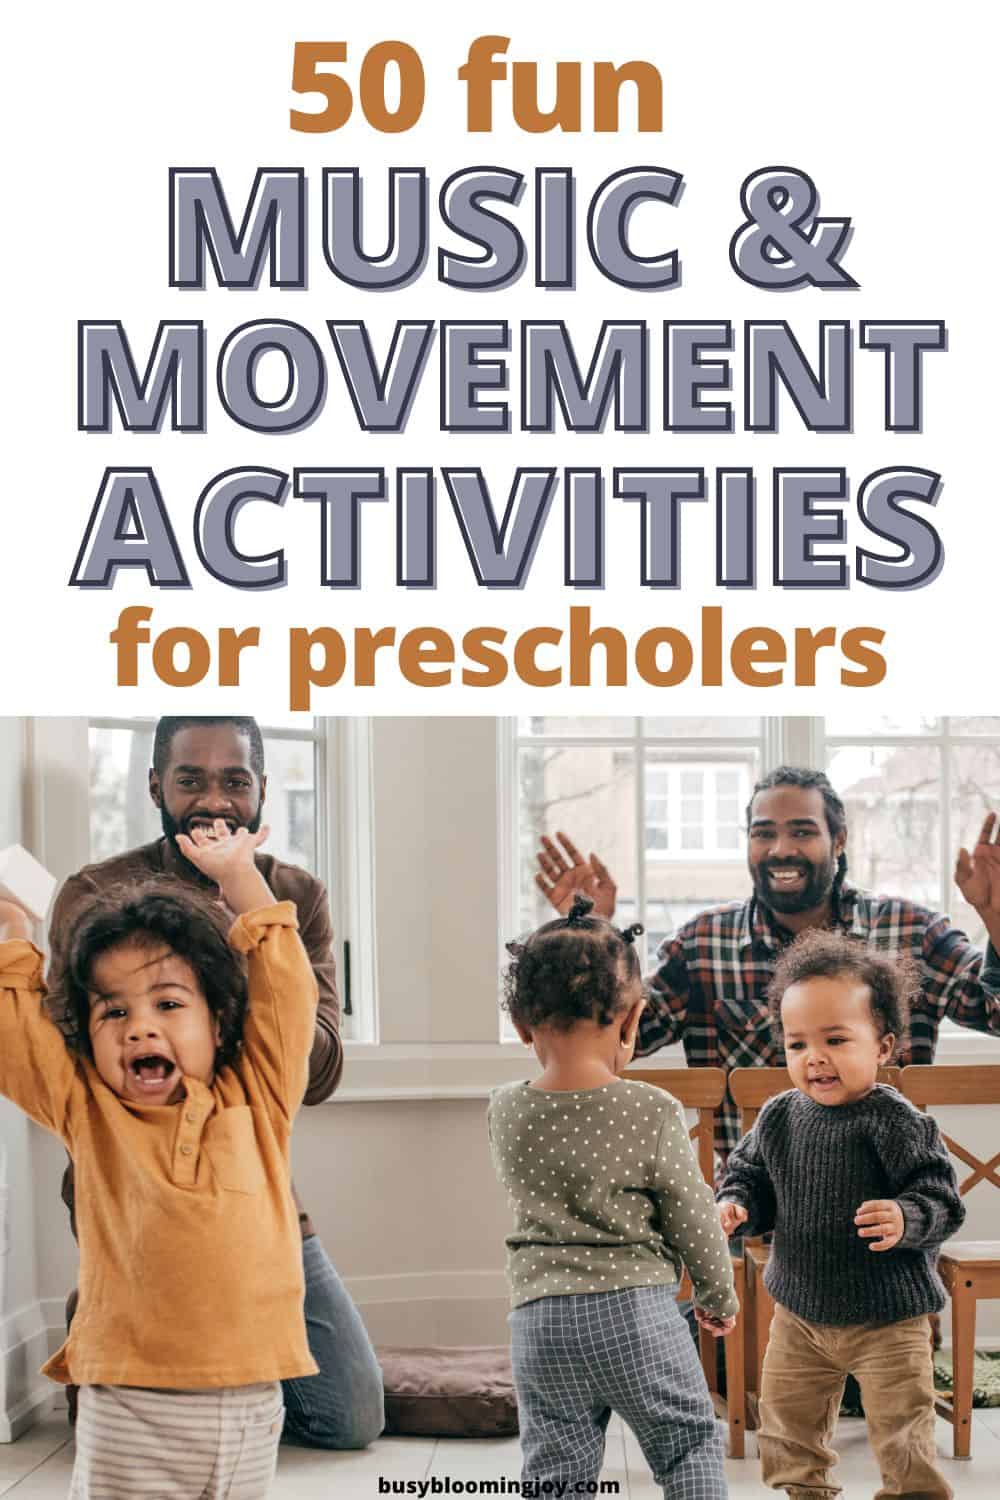 feature image + music and movement activities for preschoolers